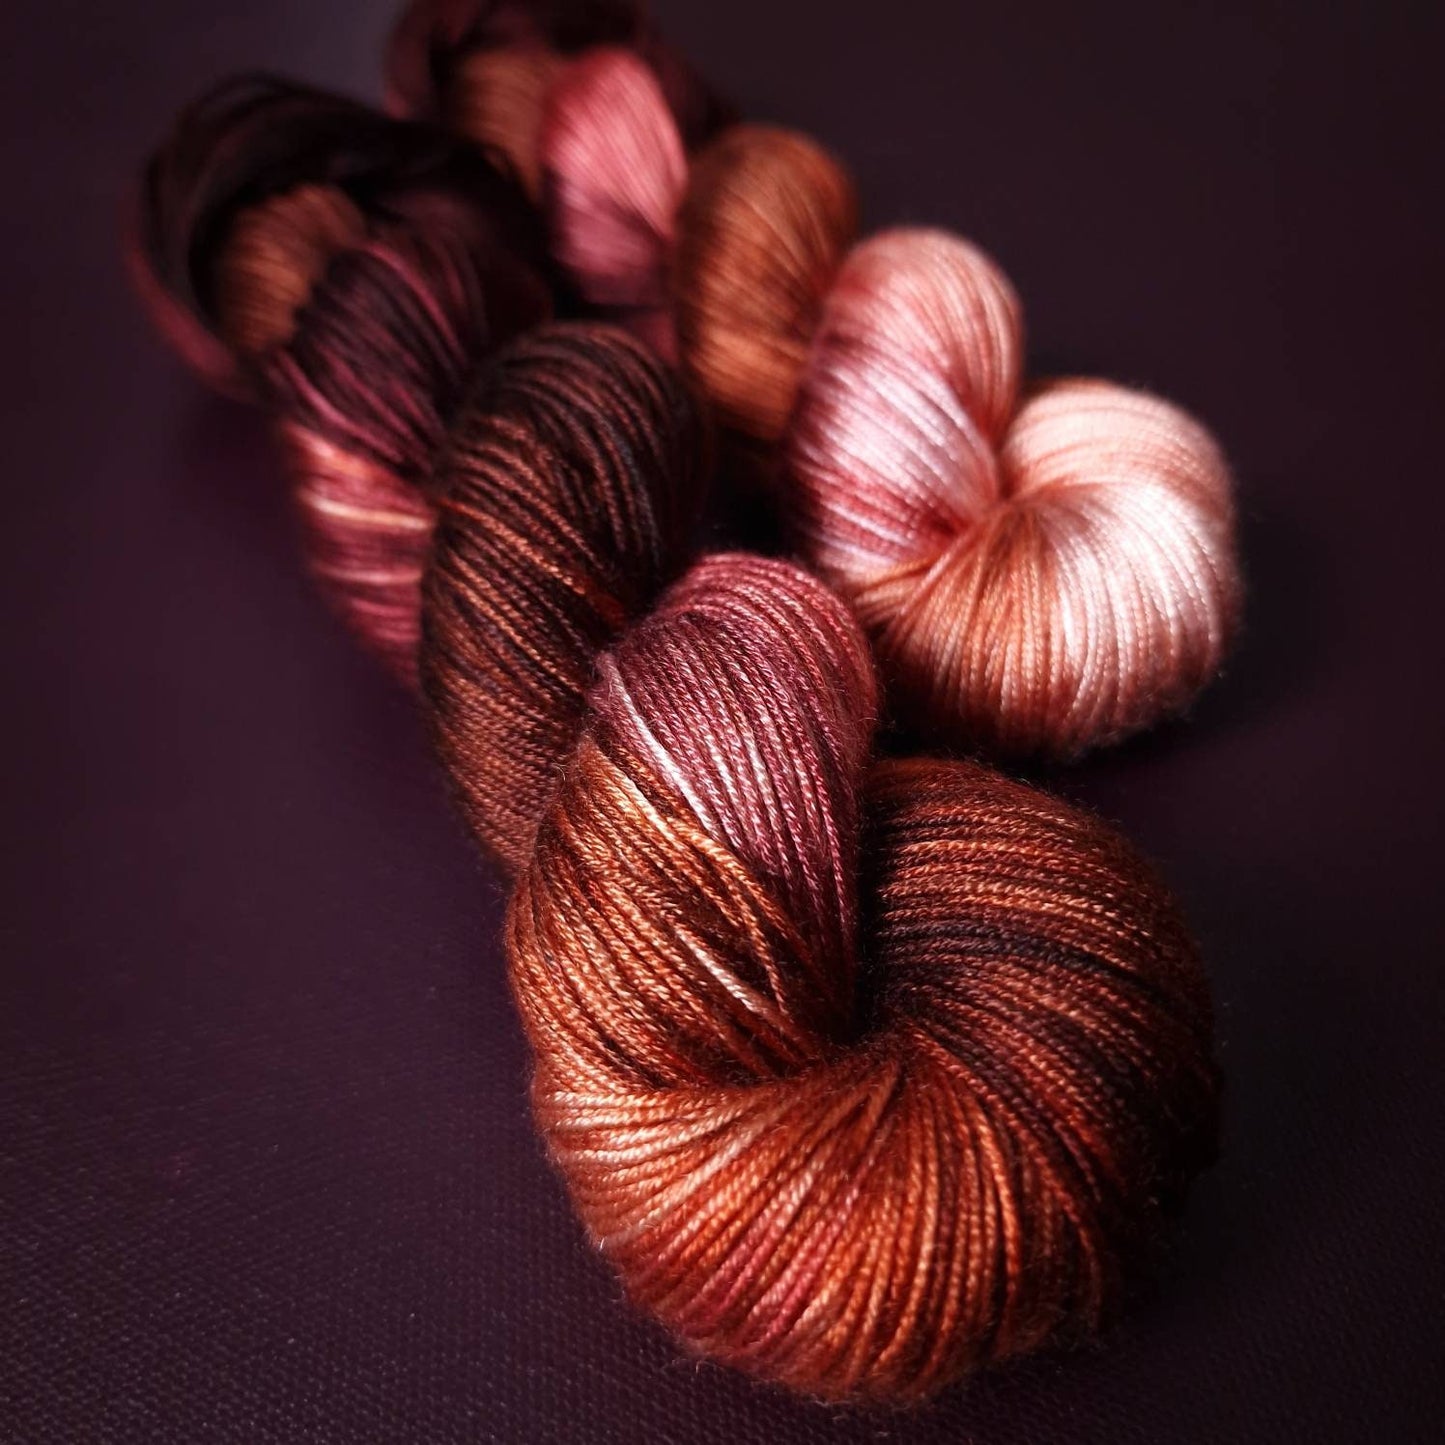 Hand dyed yarn ~Spicy Salmon ***Dyed to order~ fingering weight tencel, bamboo, linen yarn or light DK mercerized cotton